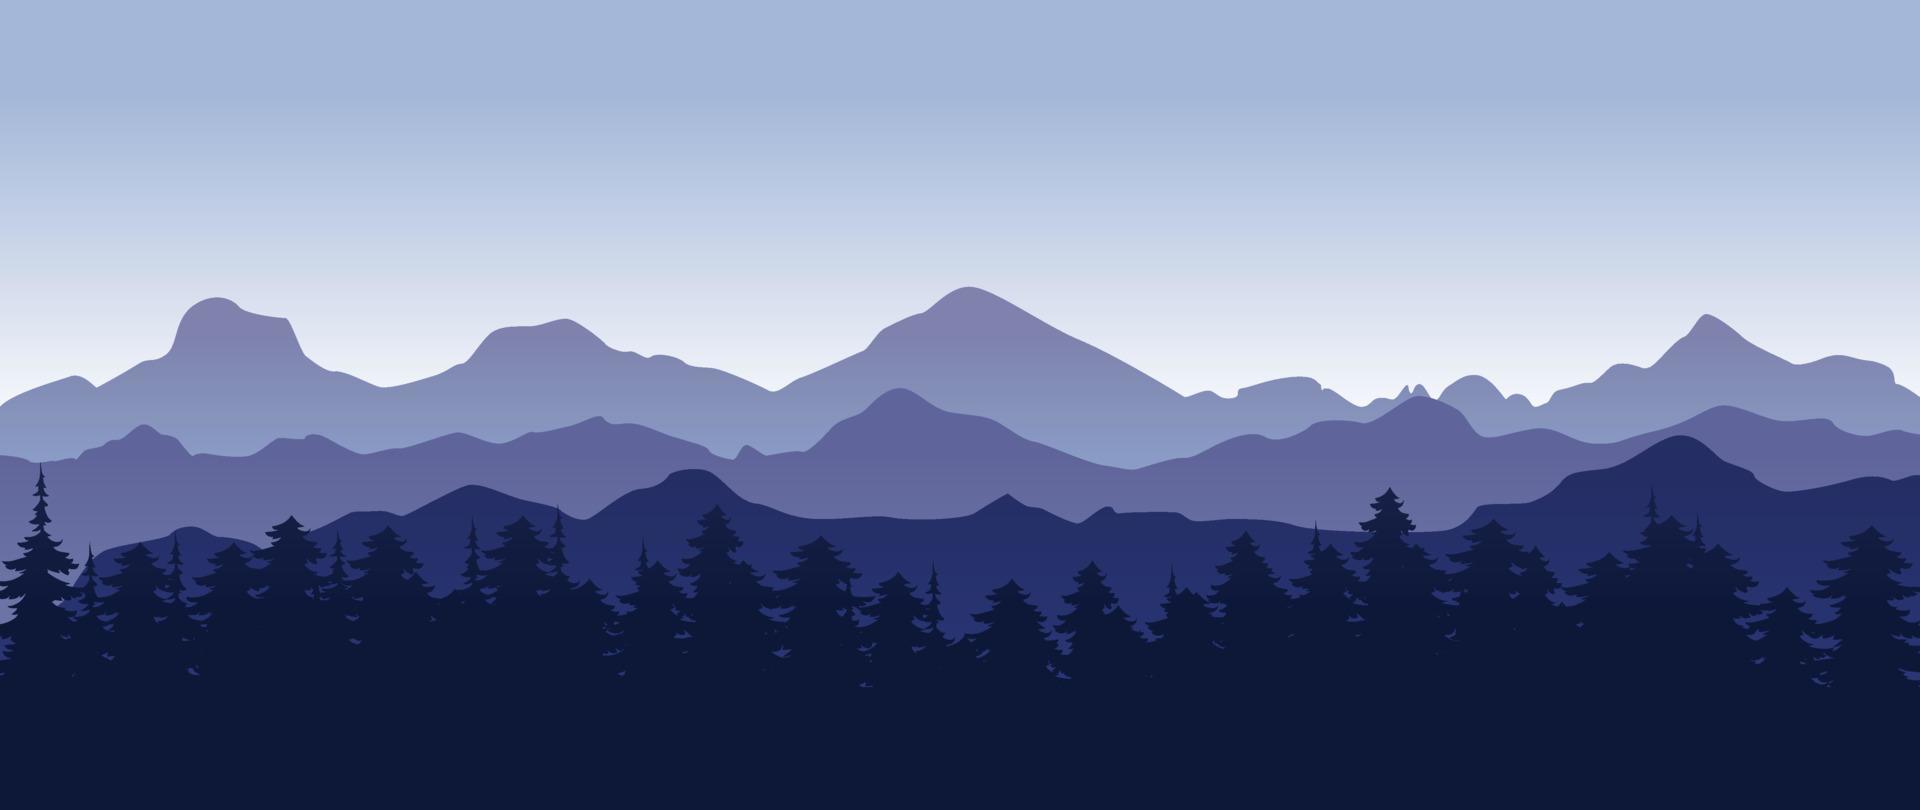 Beautiful dark blue mountain landscape with fog and forest. Pine forest. Sunrise and sunset in mountains.  Outdoor and nature concept. Vector illustration.